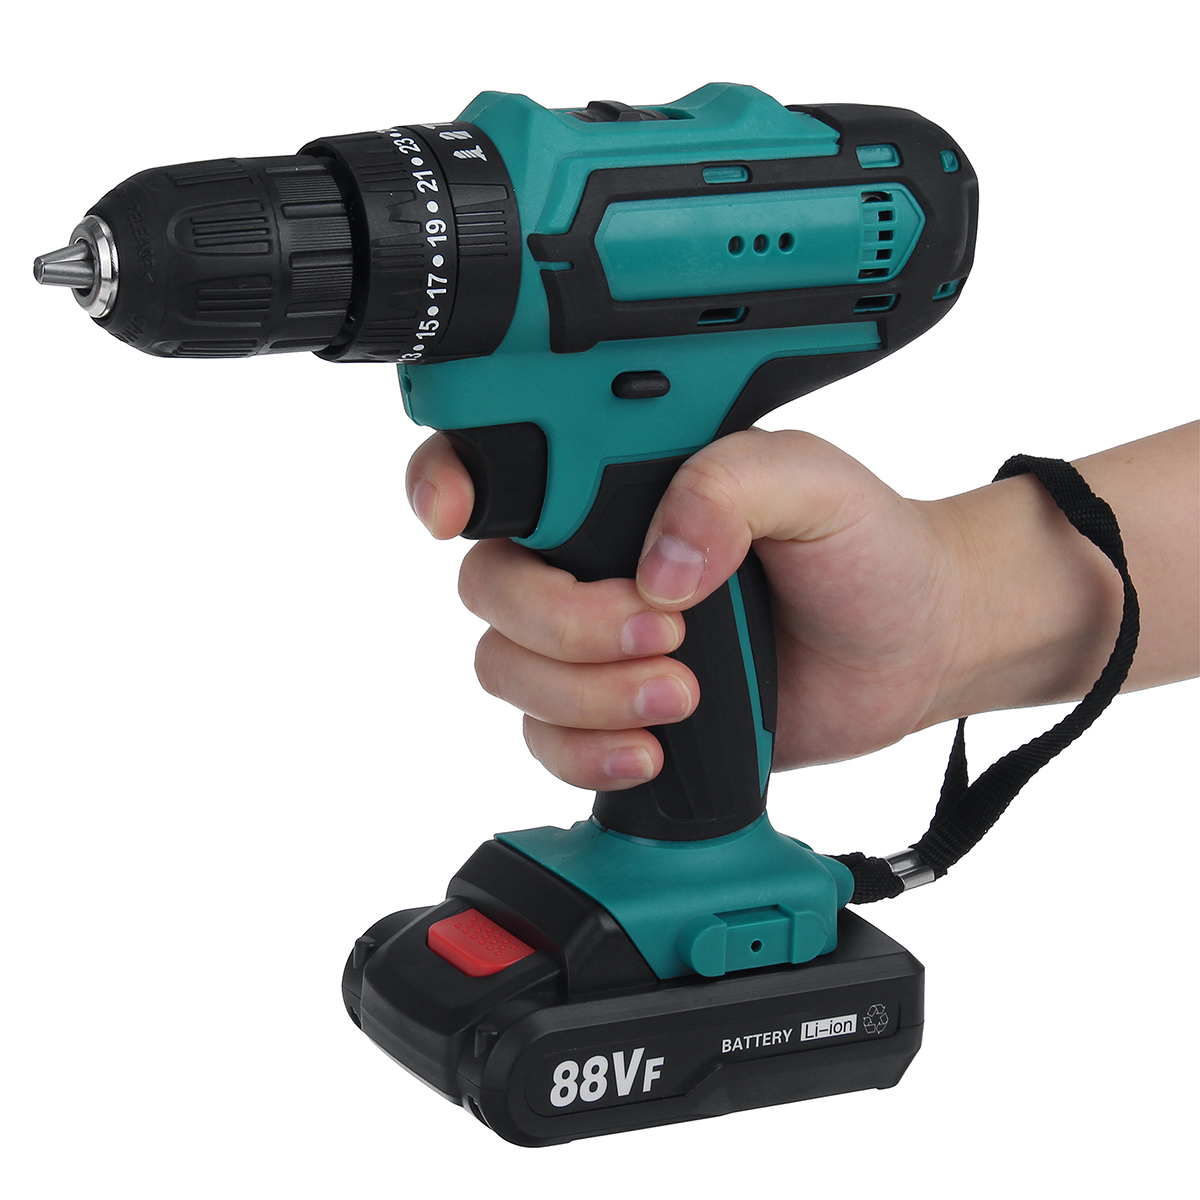 88VF-Cordless-Drill-3-IN-1-Electric-Screwdriver-Hammer-Impact-Drill-7500mAh-2-Speed-1787578-6